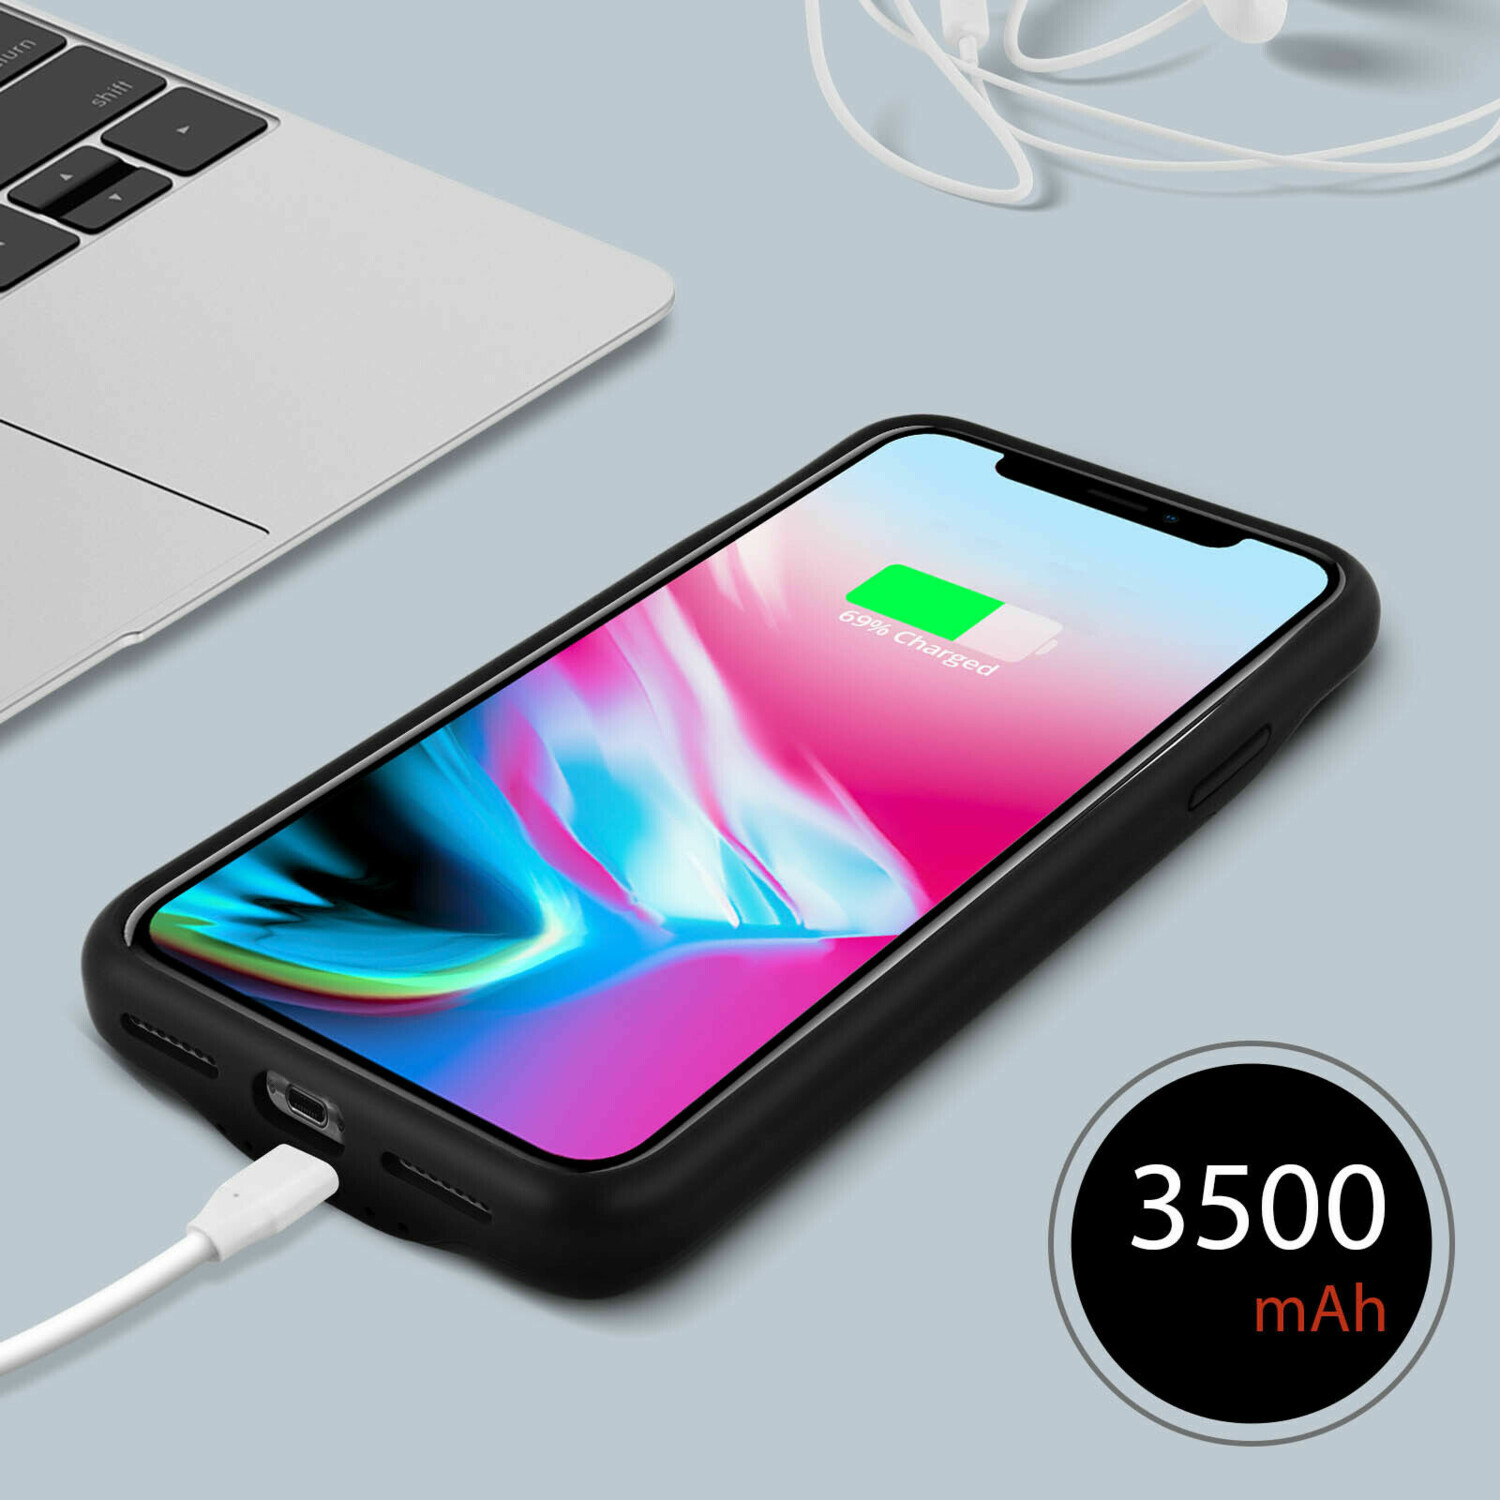 Coque batterie pour iPhone X/XS, iPhone X / XR / XS / XS Max